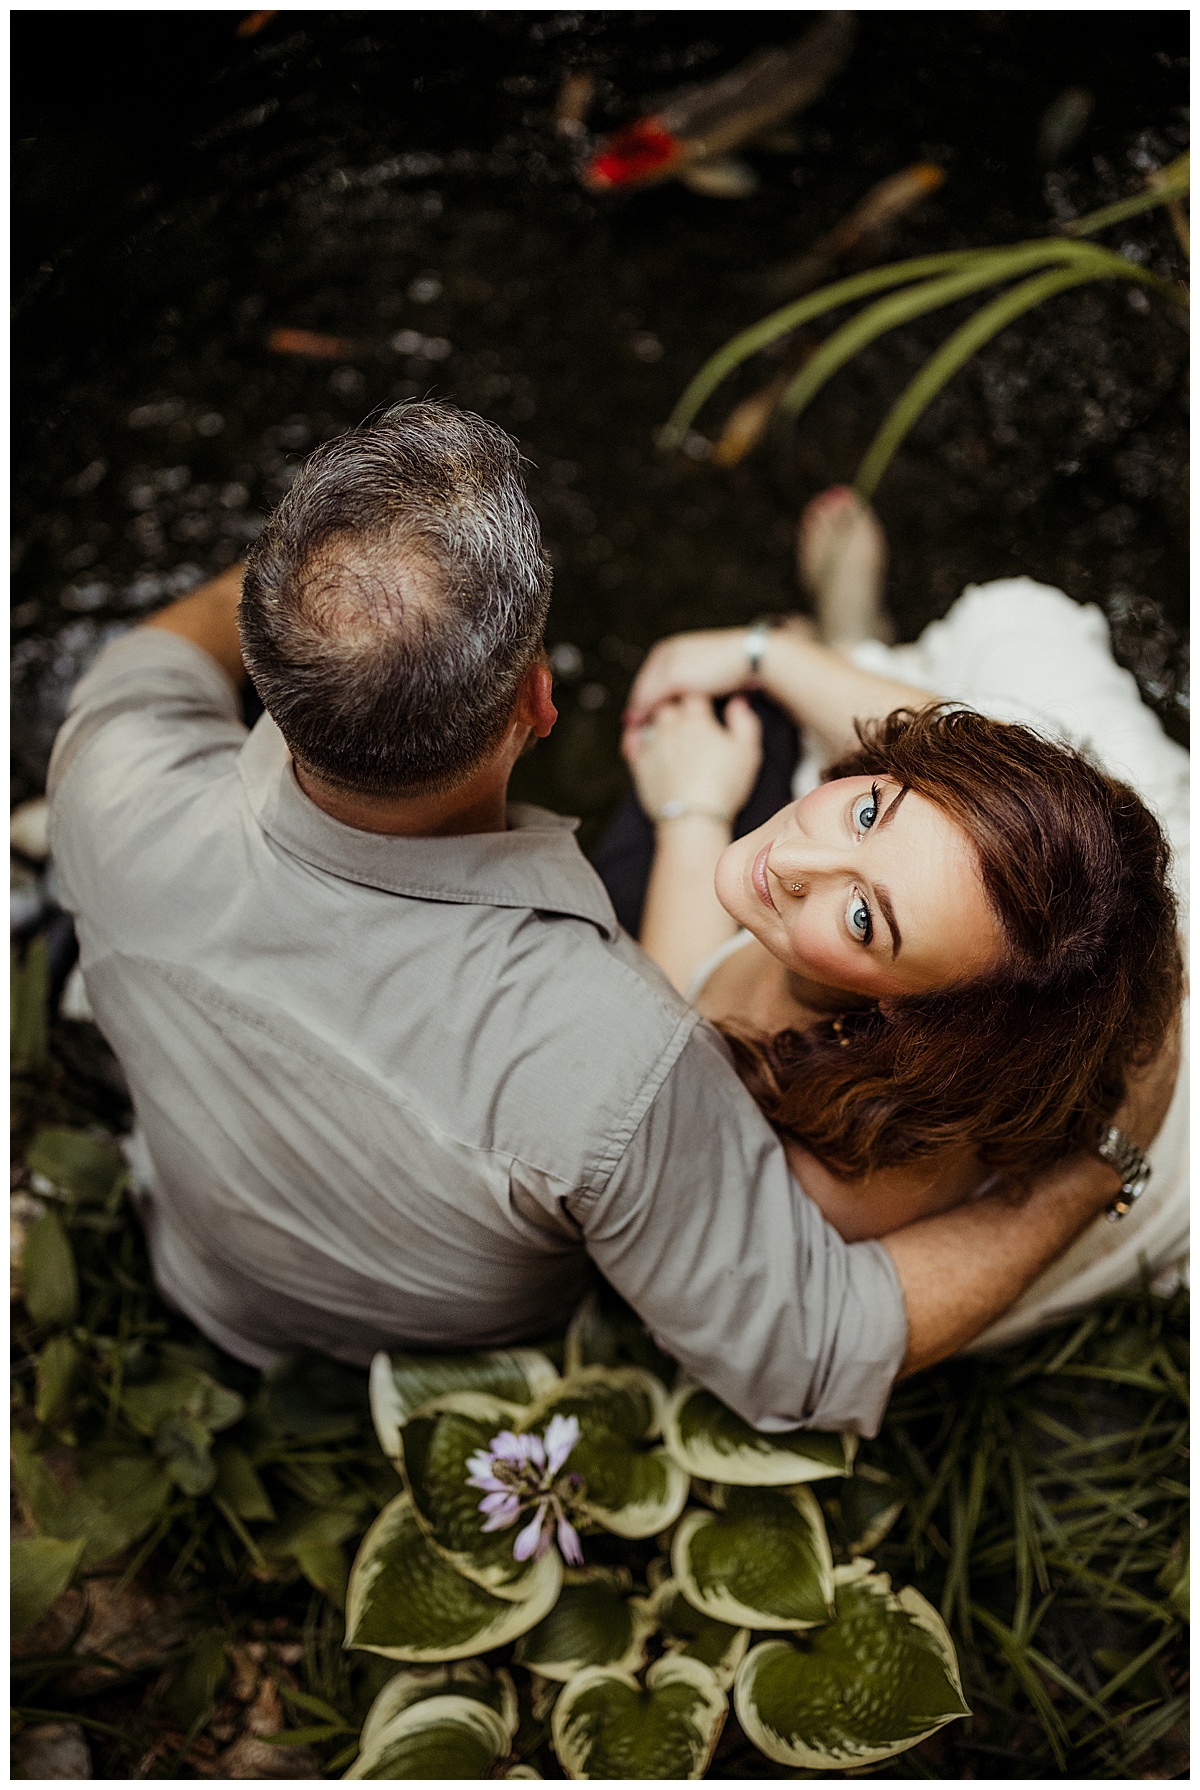 Parents smile together and sit near one another for Magical Backyard Maternity Session